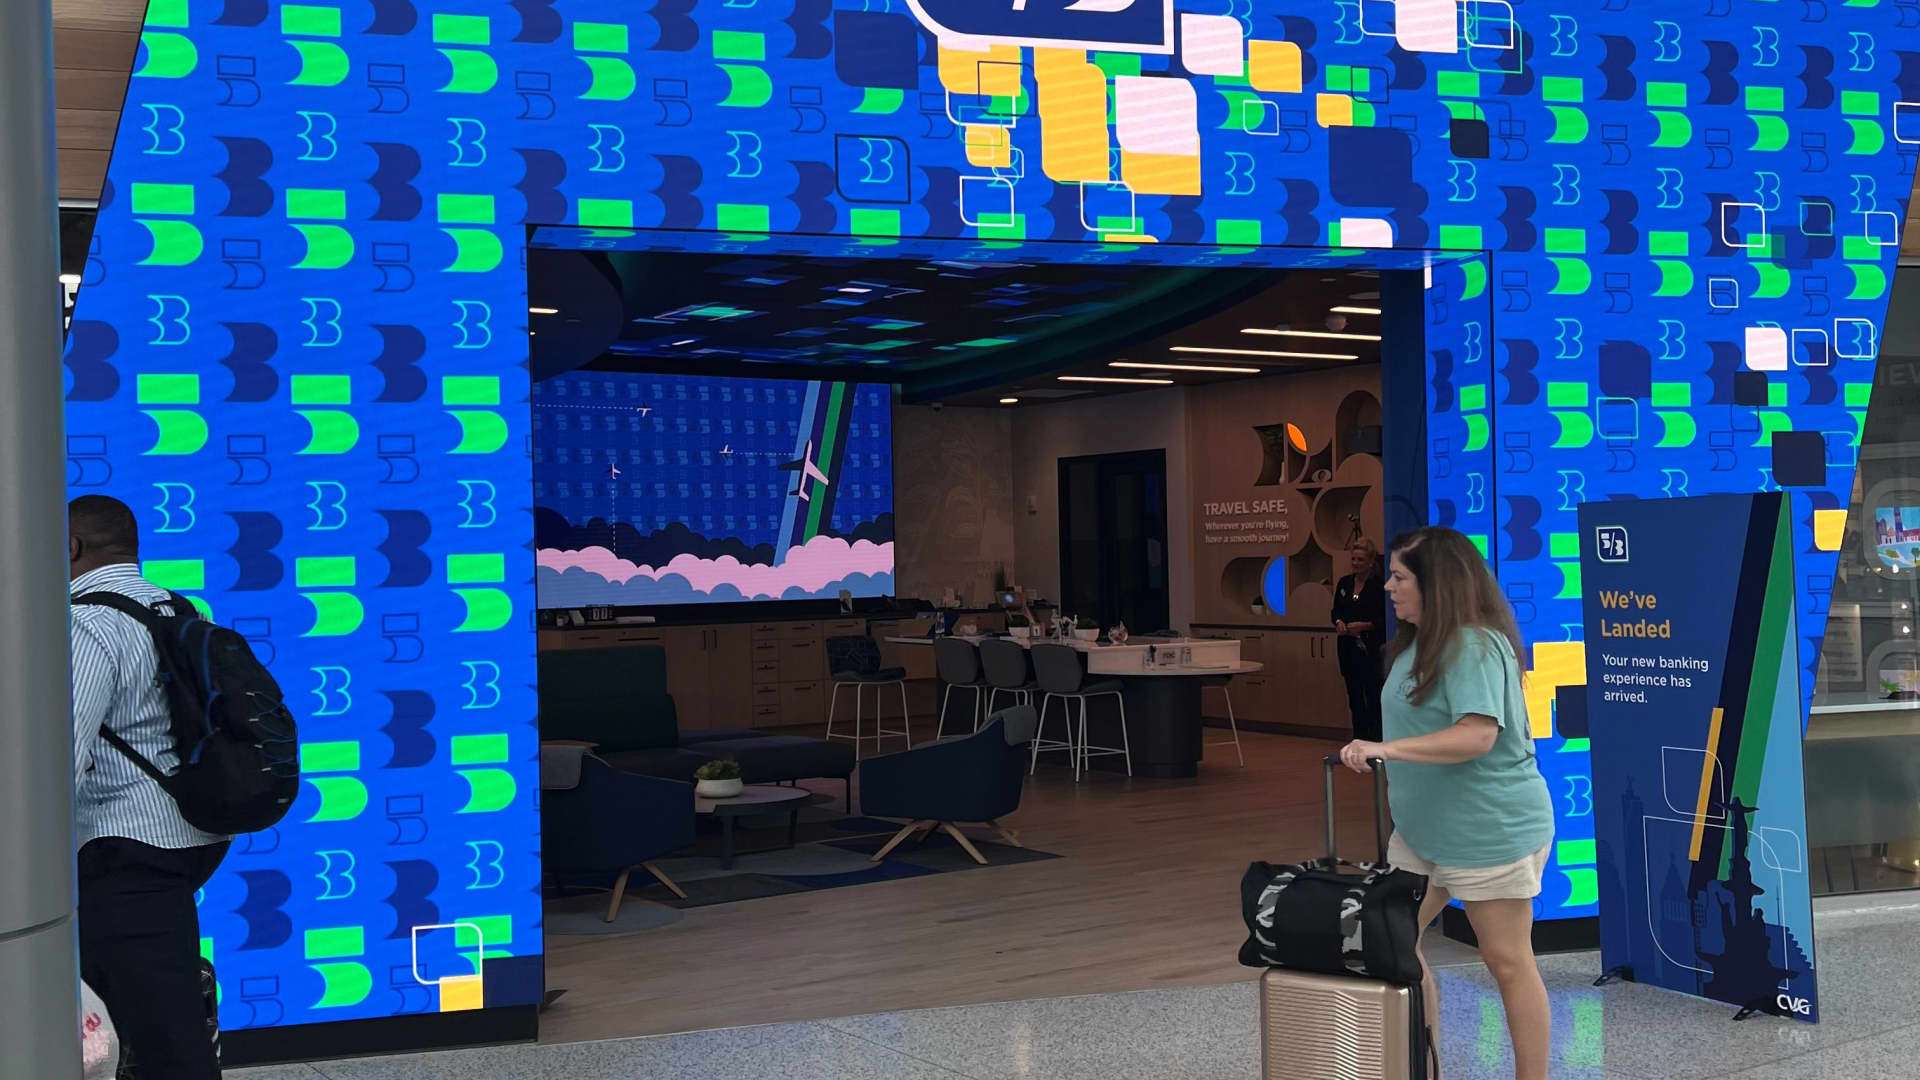 Inside US airport terminals, banks are merging elite travel clubs with branch offices - CNBC